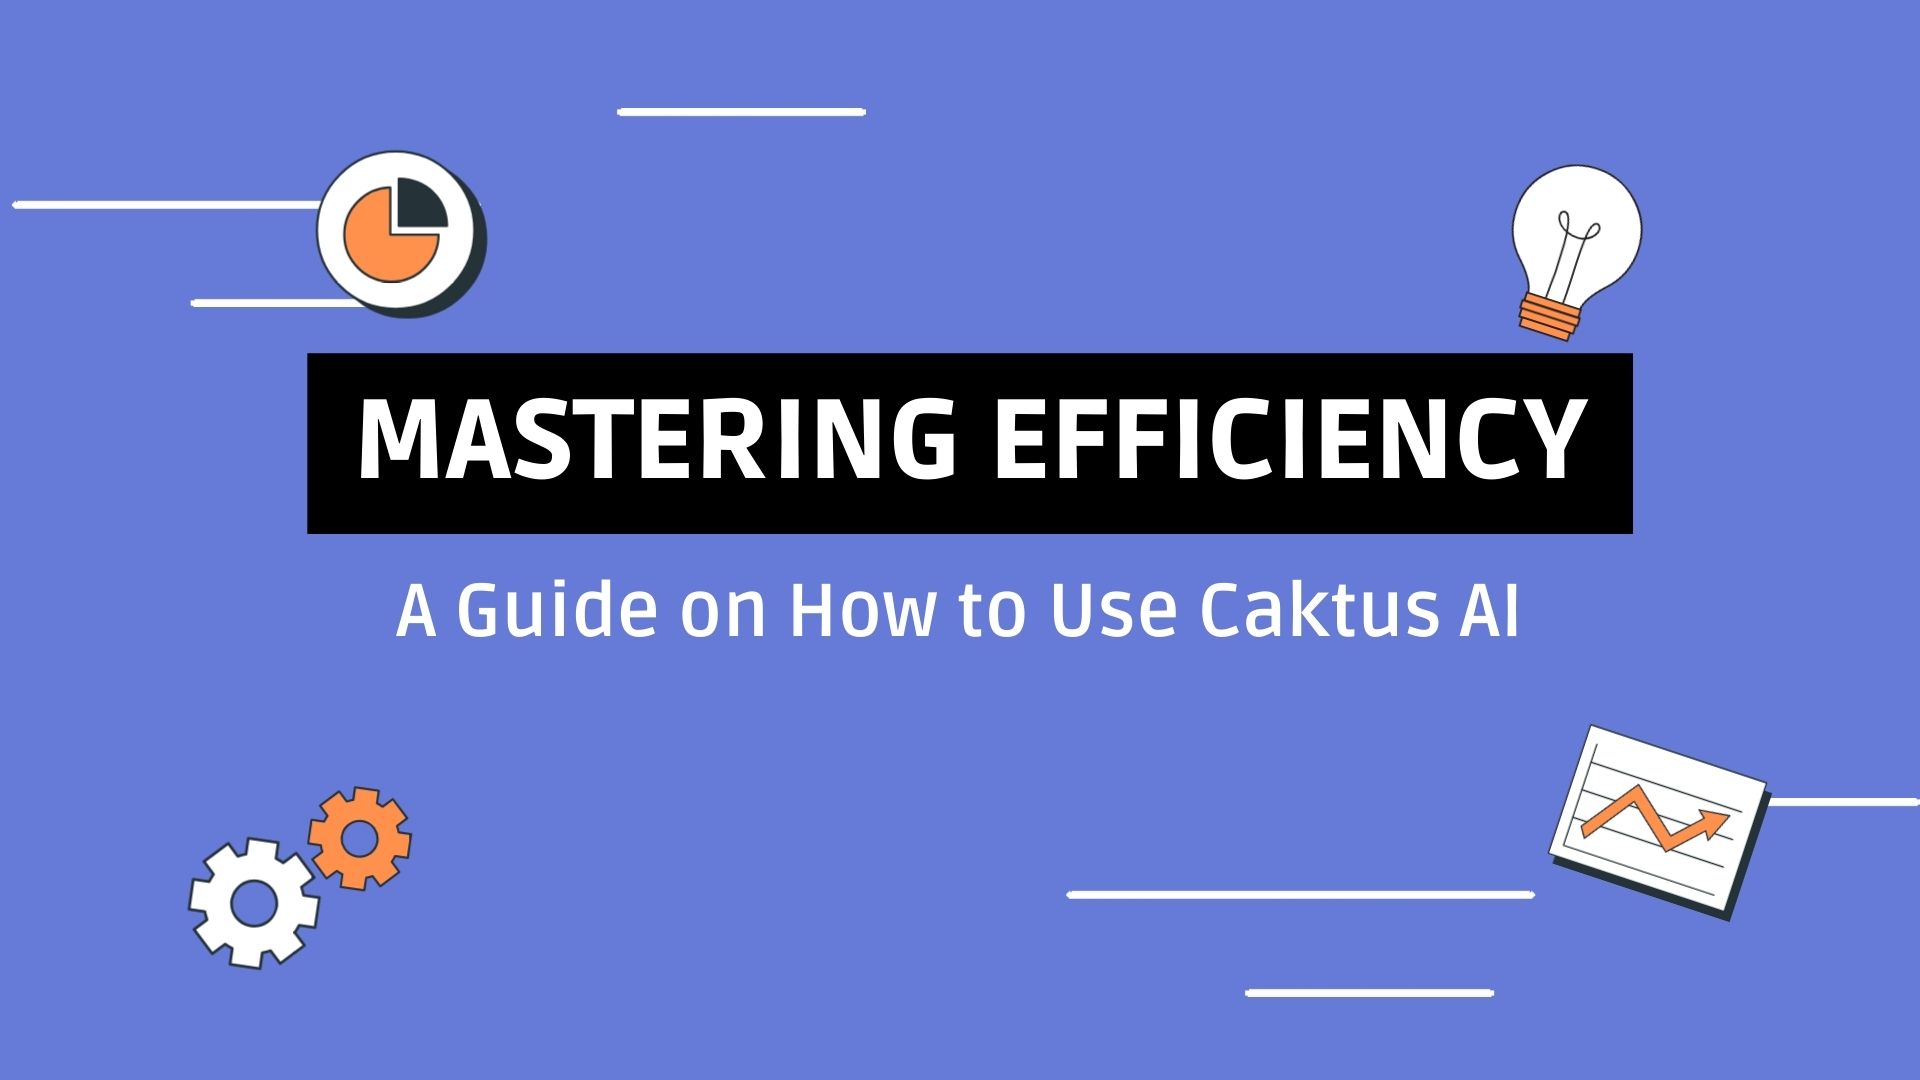 Mastering Efficiency: A Guide on How to Use Caktus AI